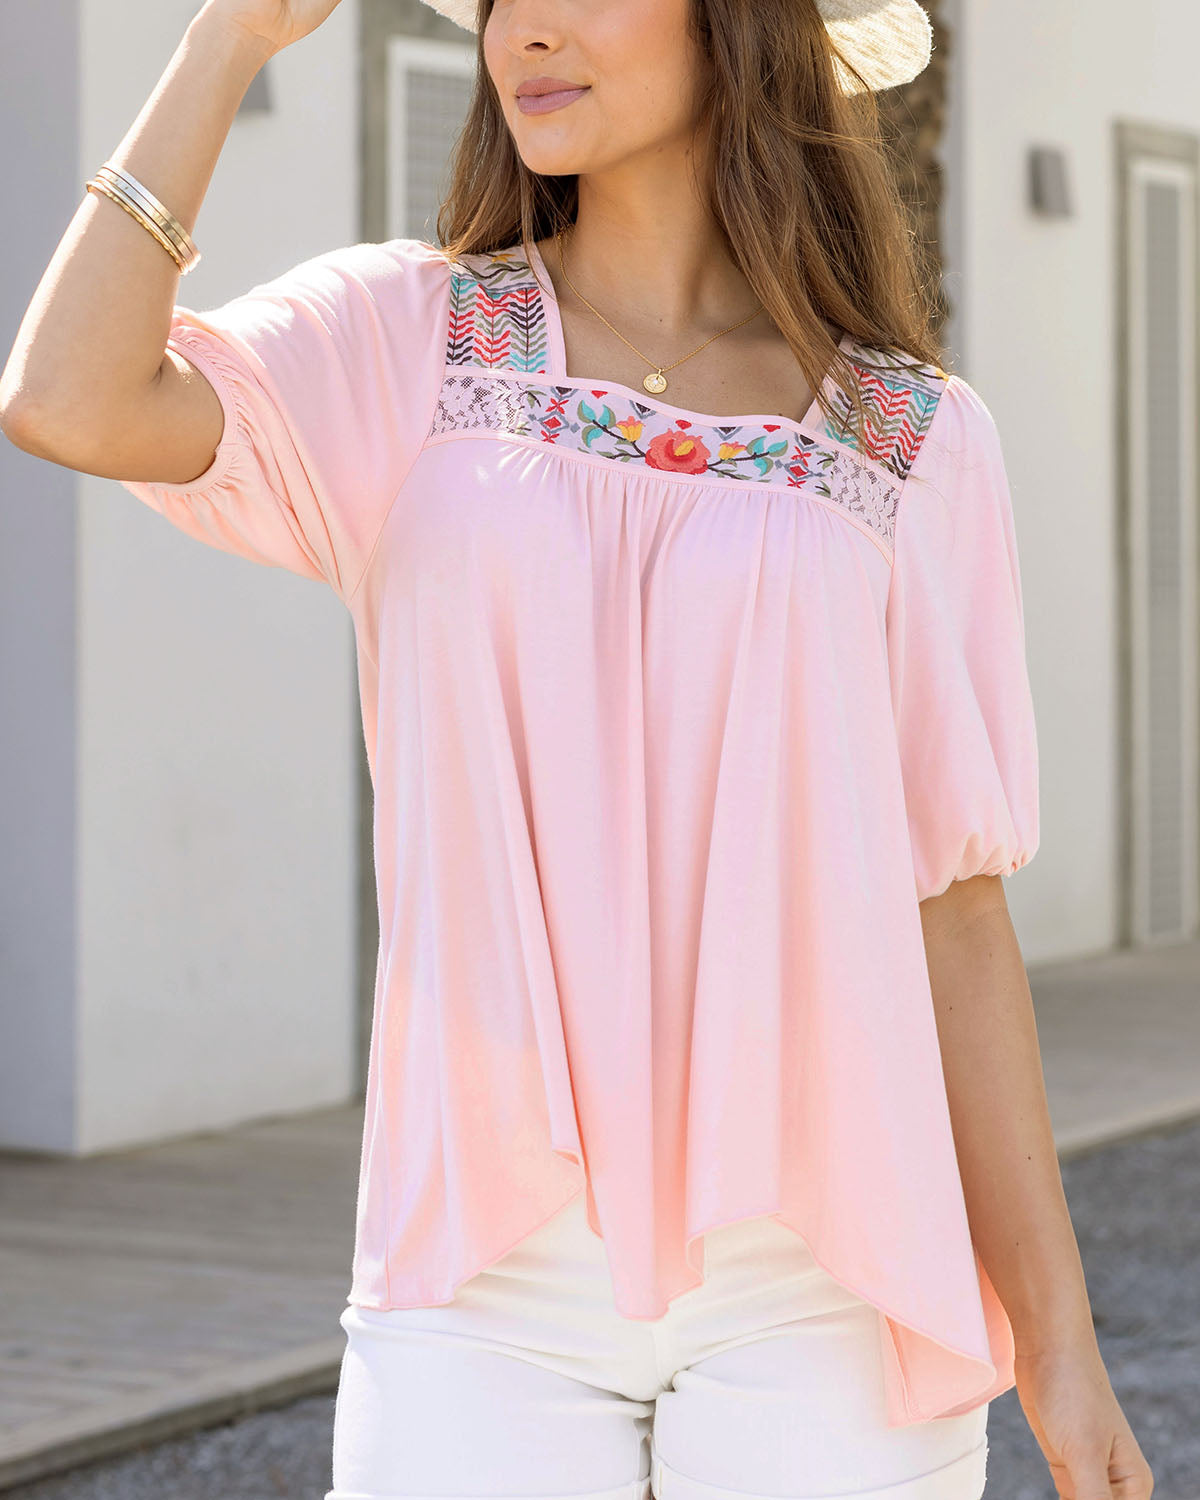 Island Embroidered Top - FINAL SALE - Grace and Lace